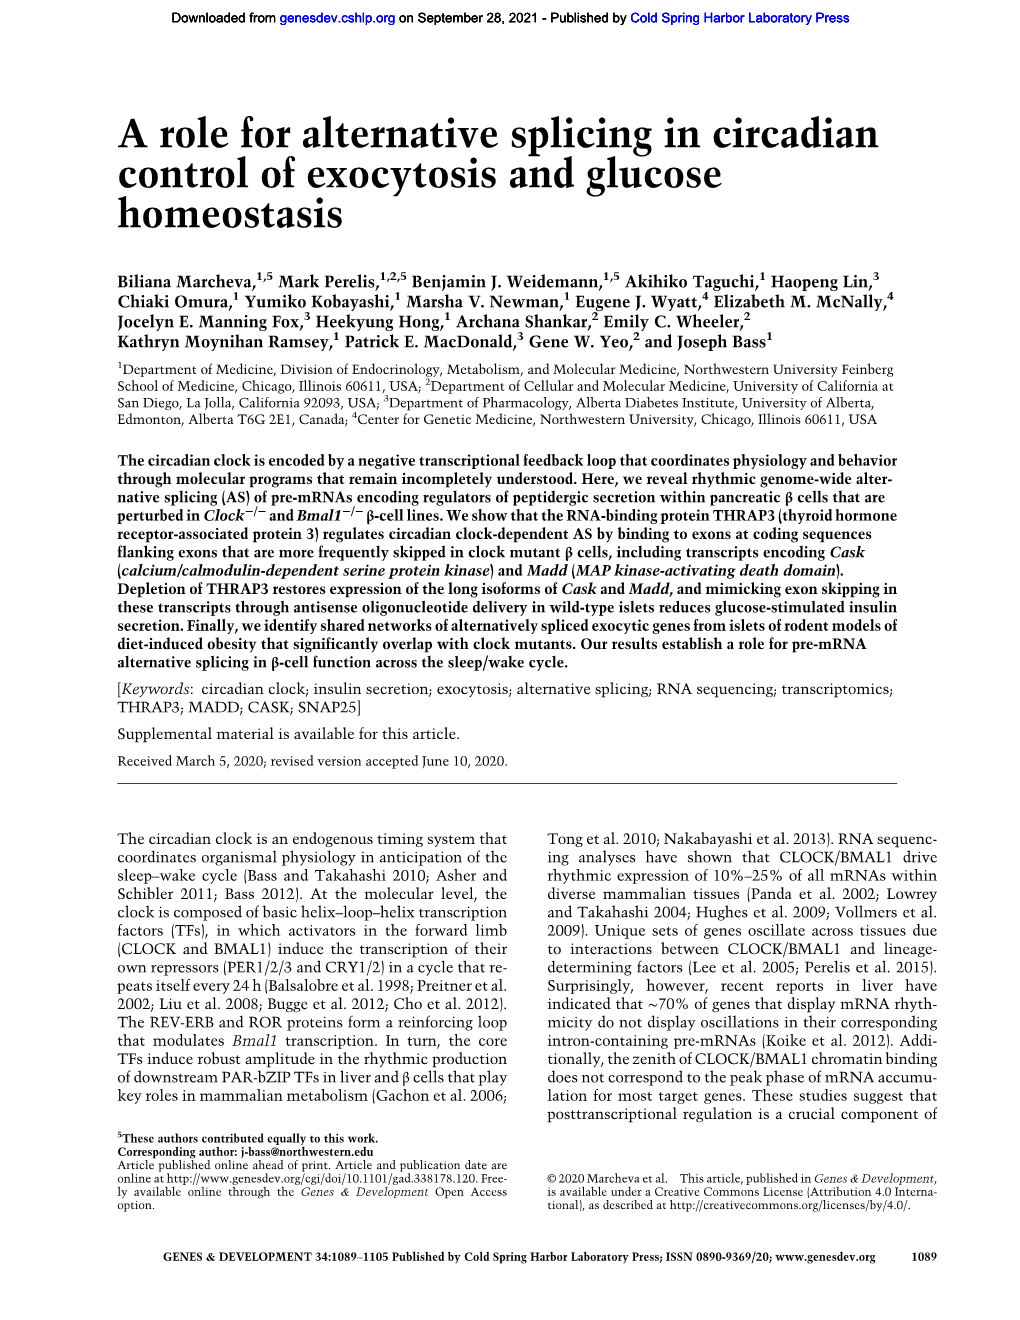 A Role for Alternative Splicing in Circadian Control of Exocytosis and Glucose Homeostasis